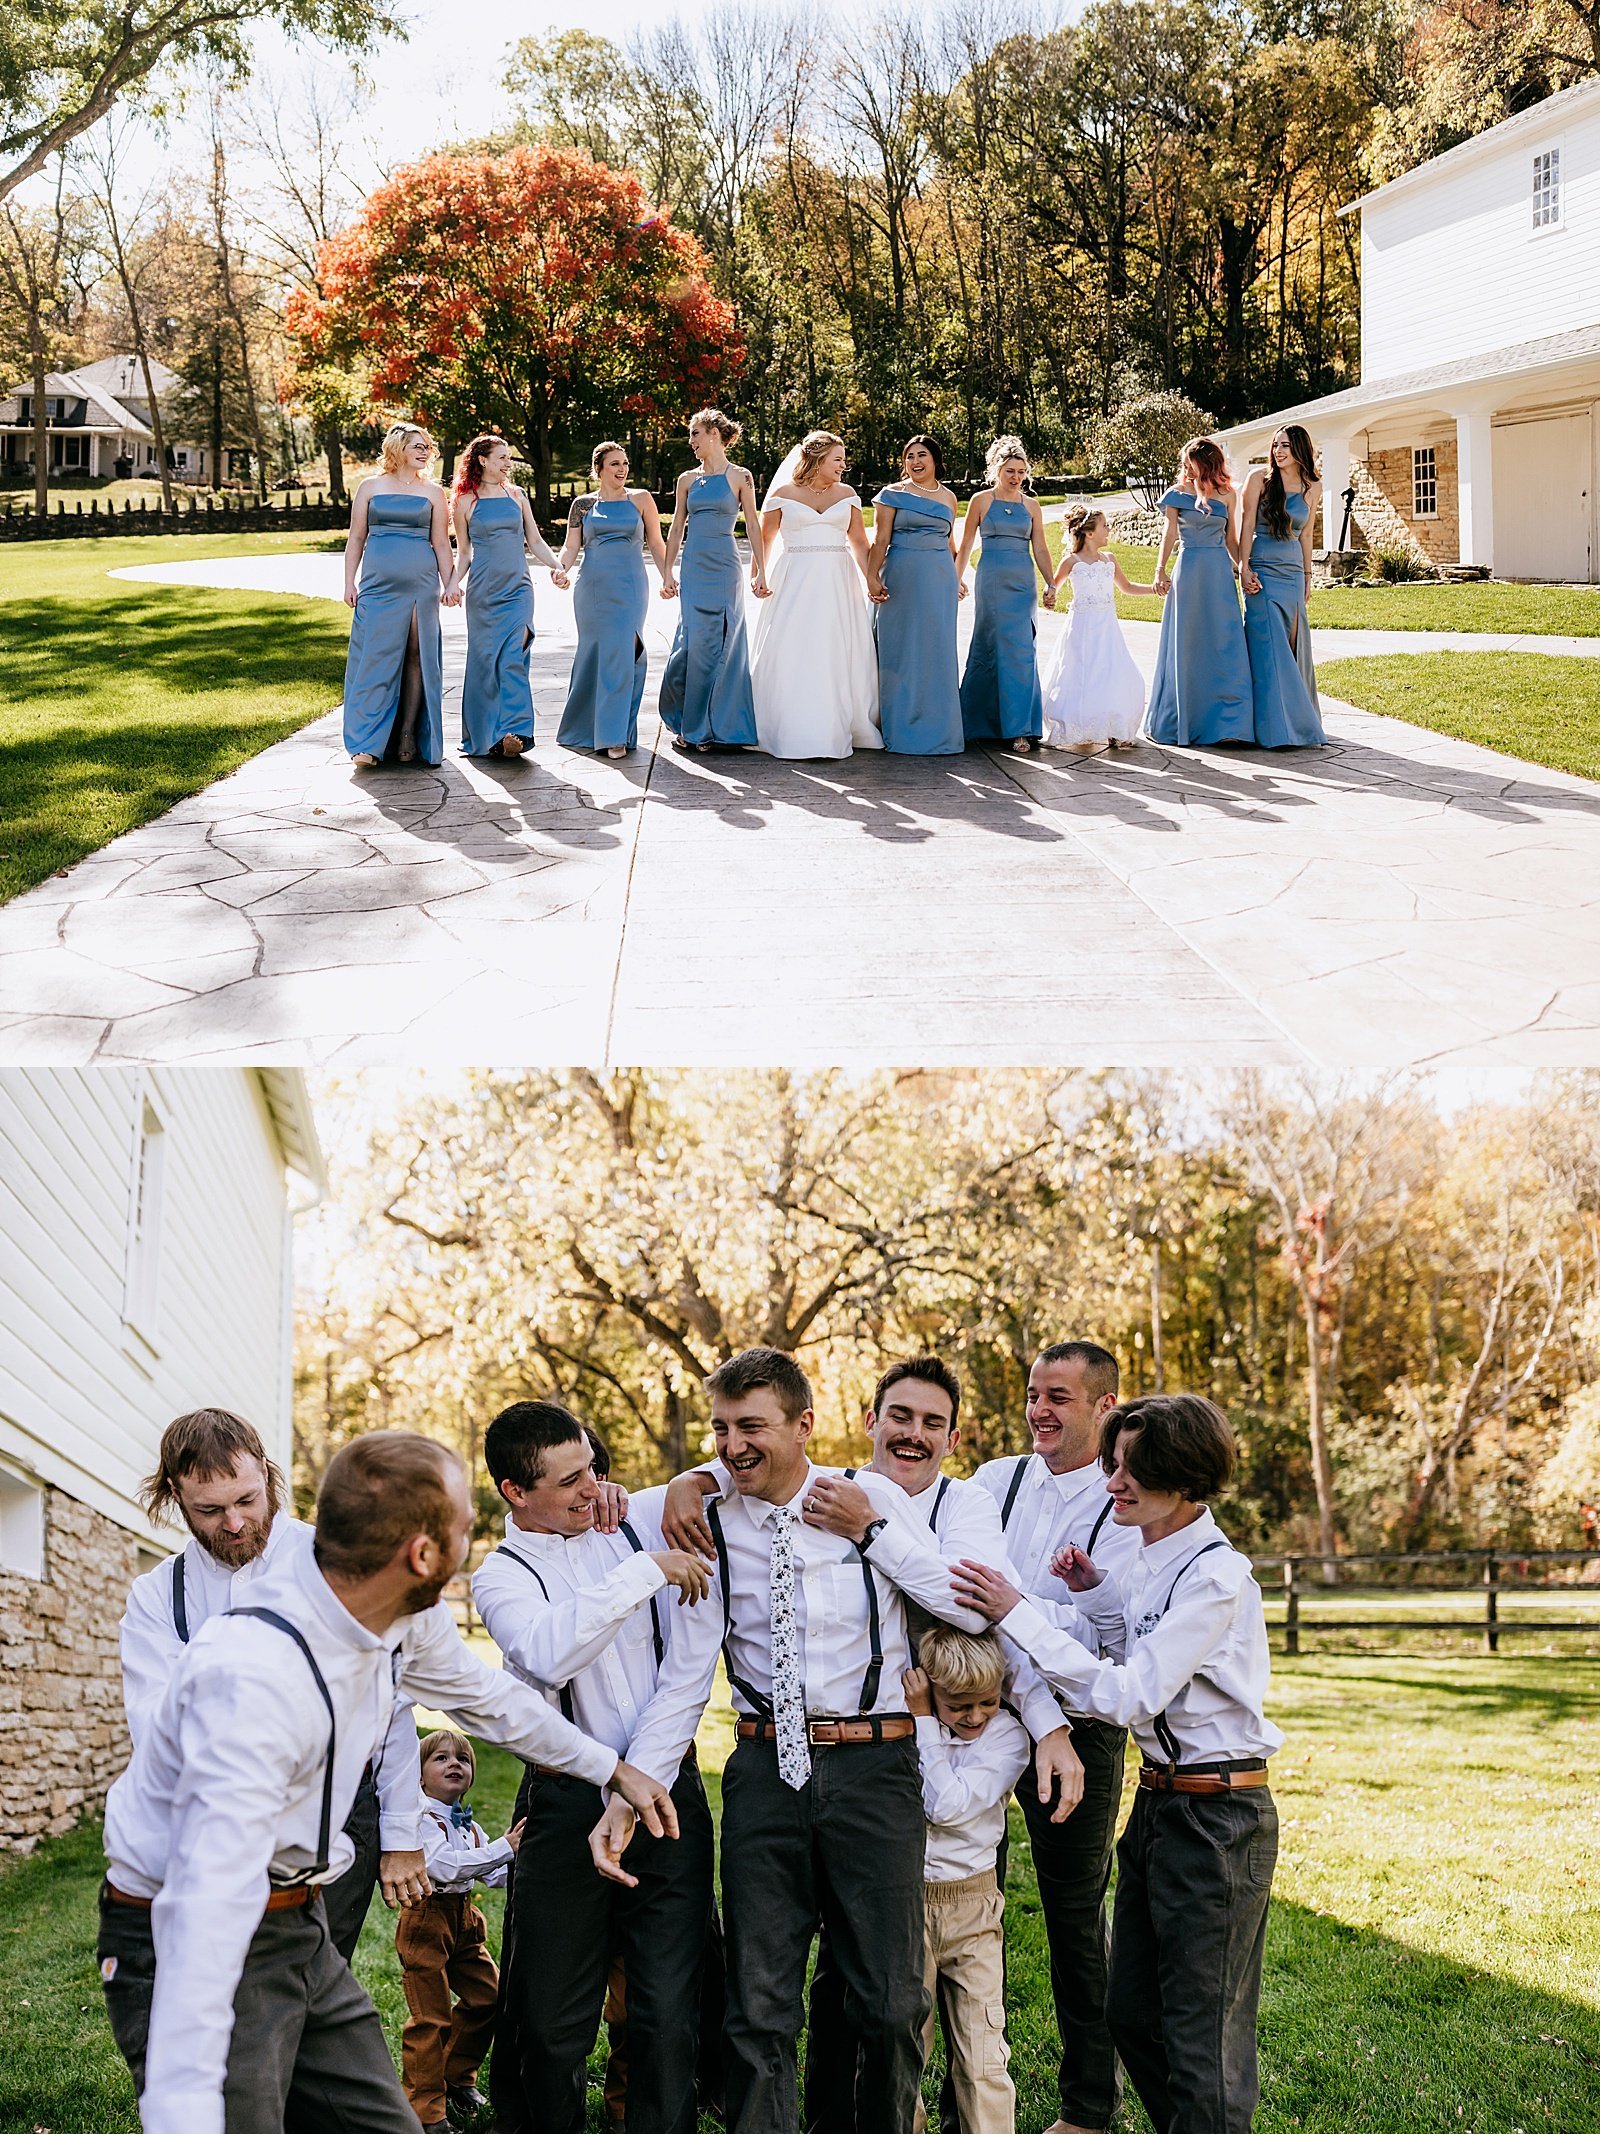  Blue and white wedding party for Minnesota wedding  